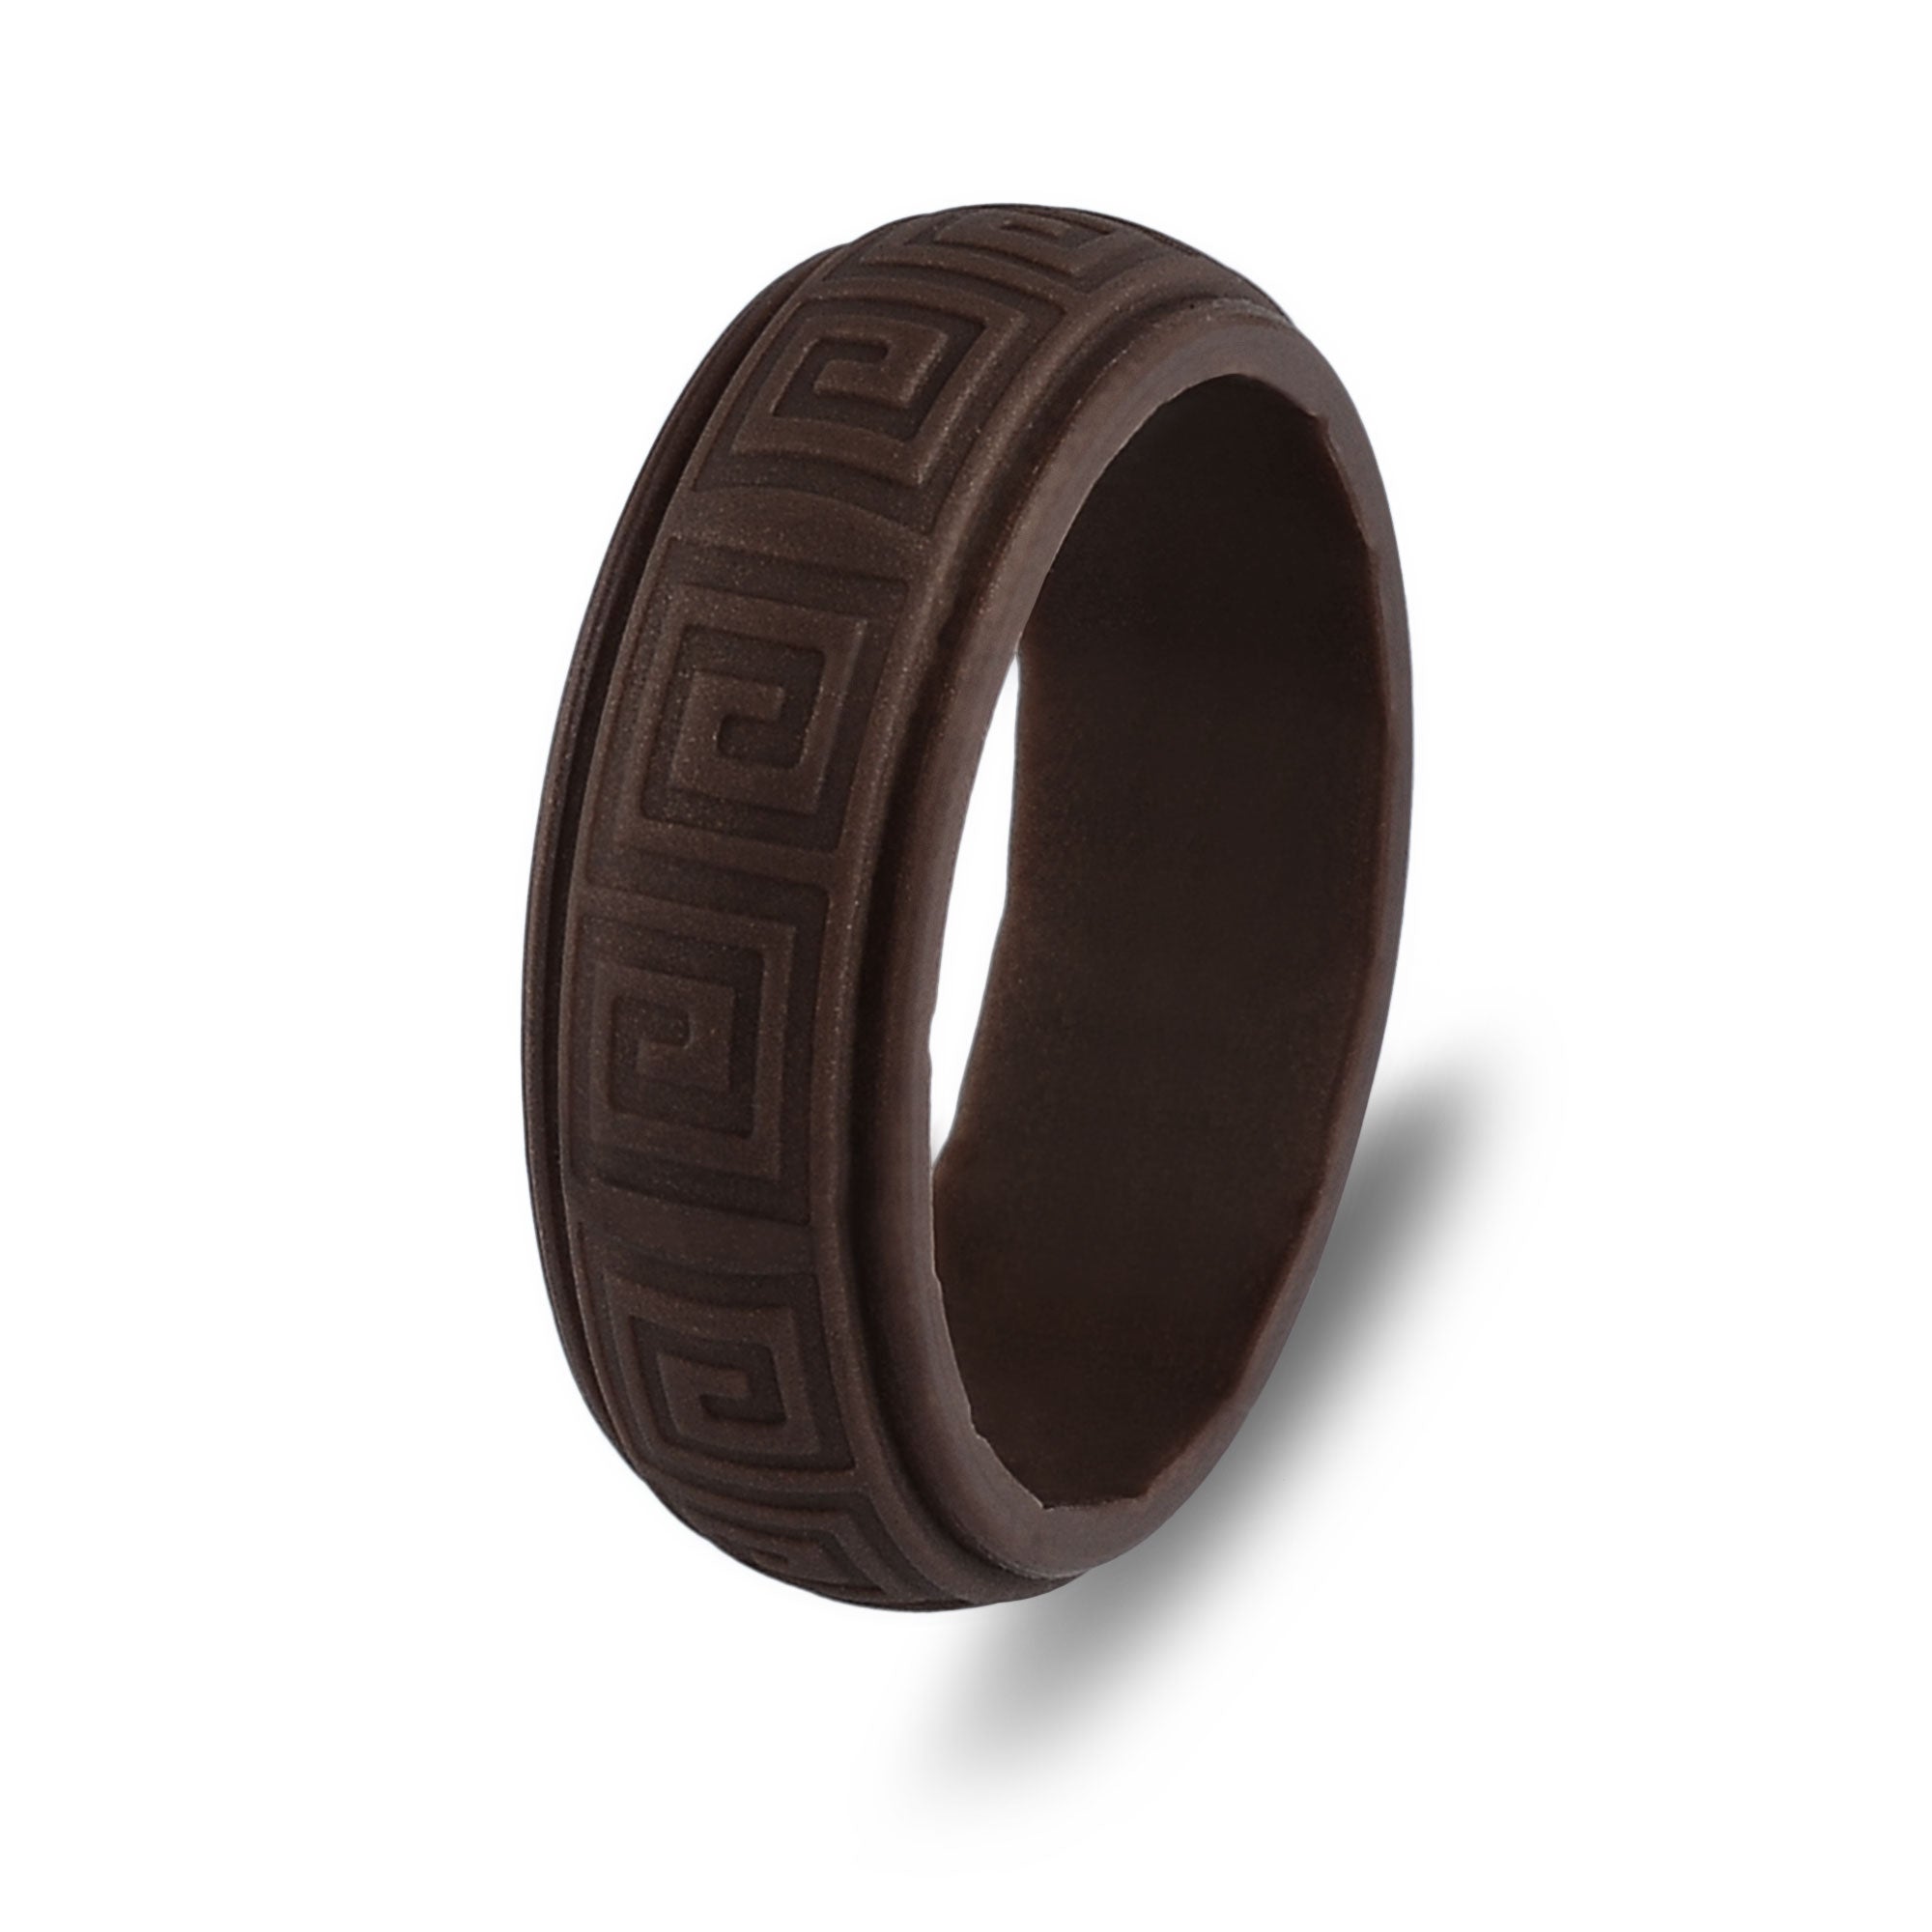 The Rustic - Silicone Ring